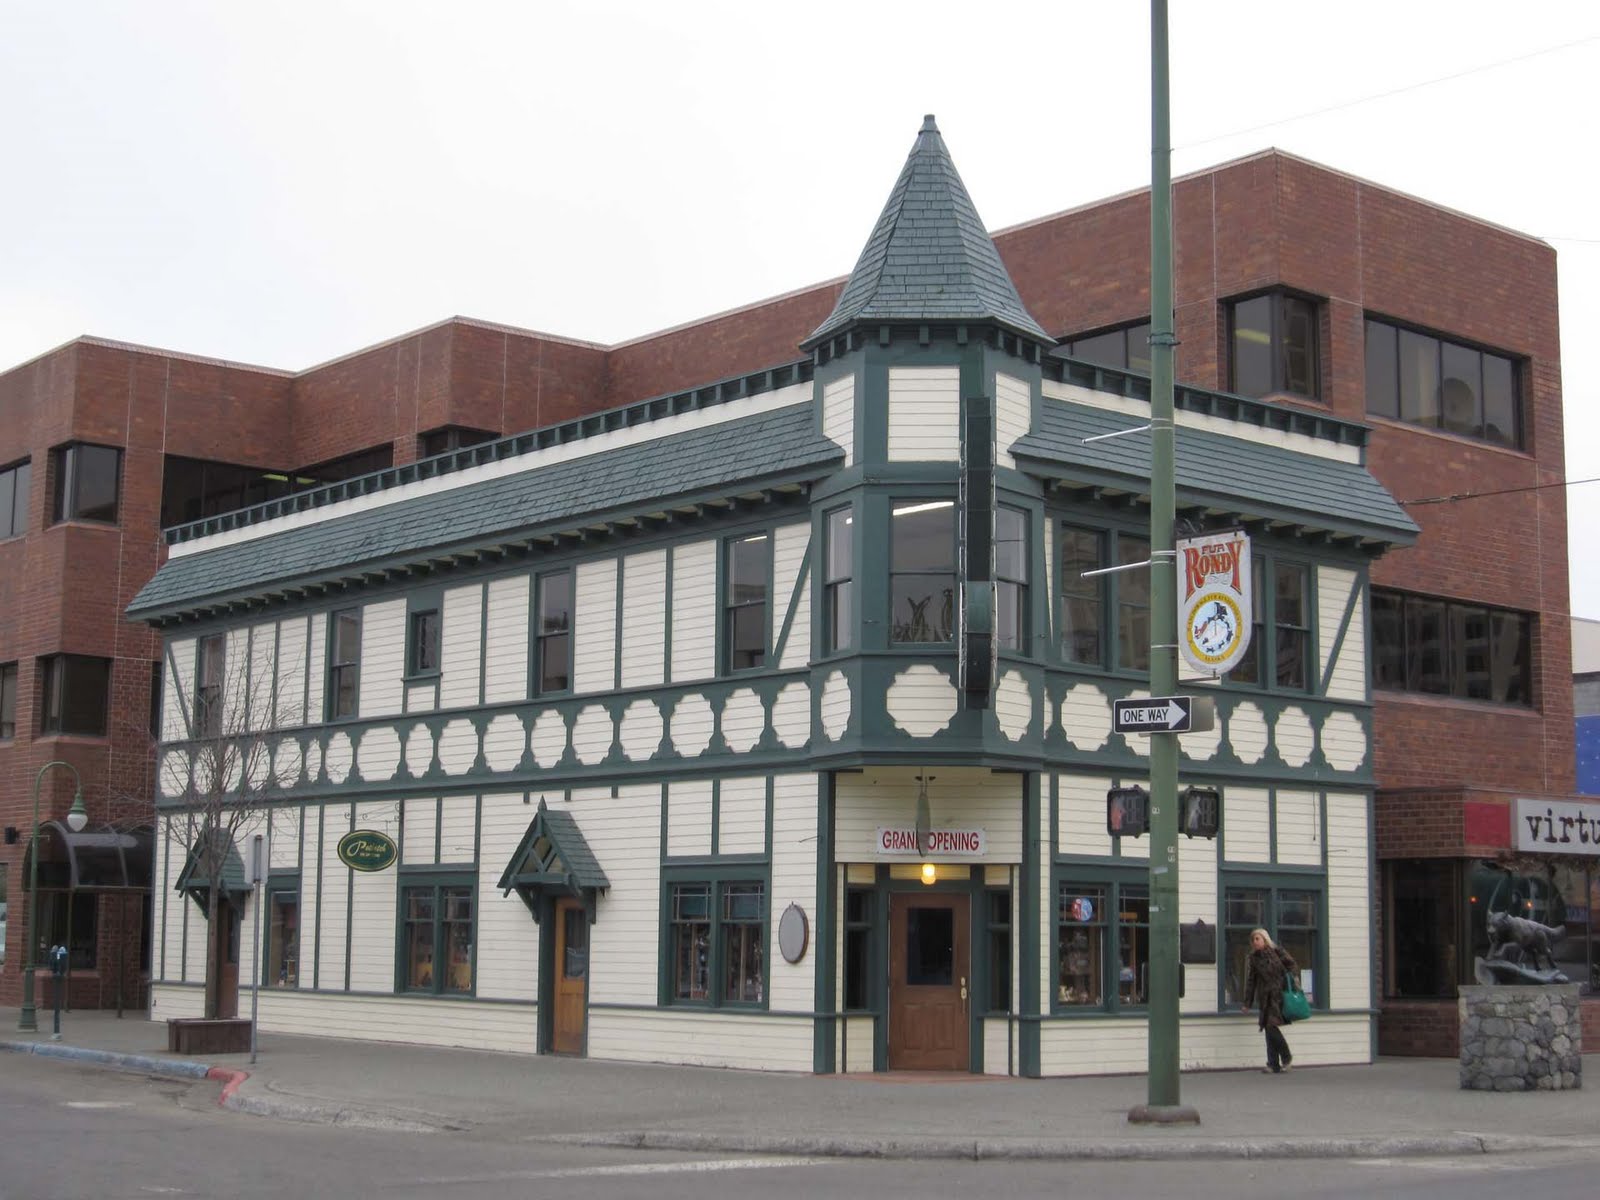 The oldest commercial building in Anchorage, Alaska.